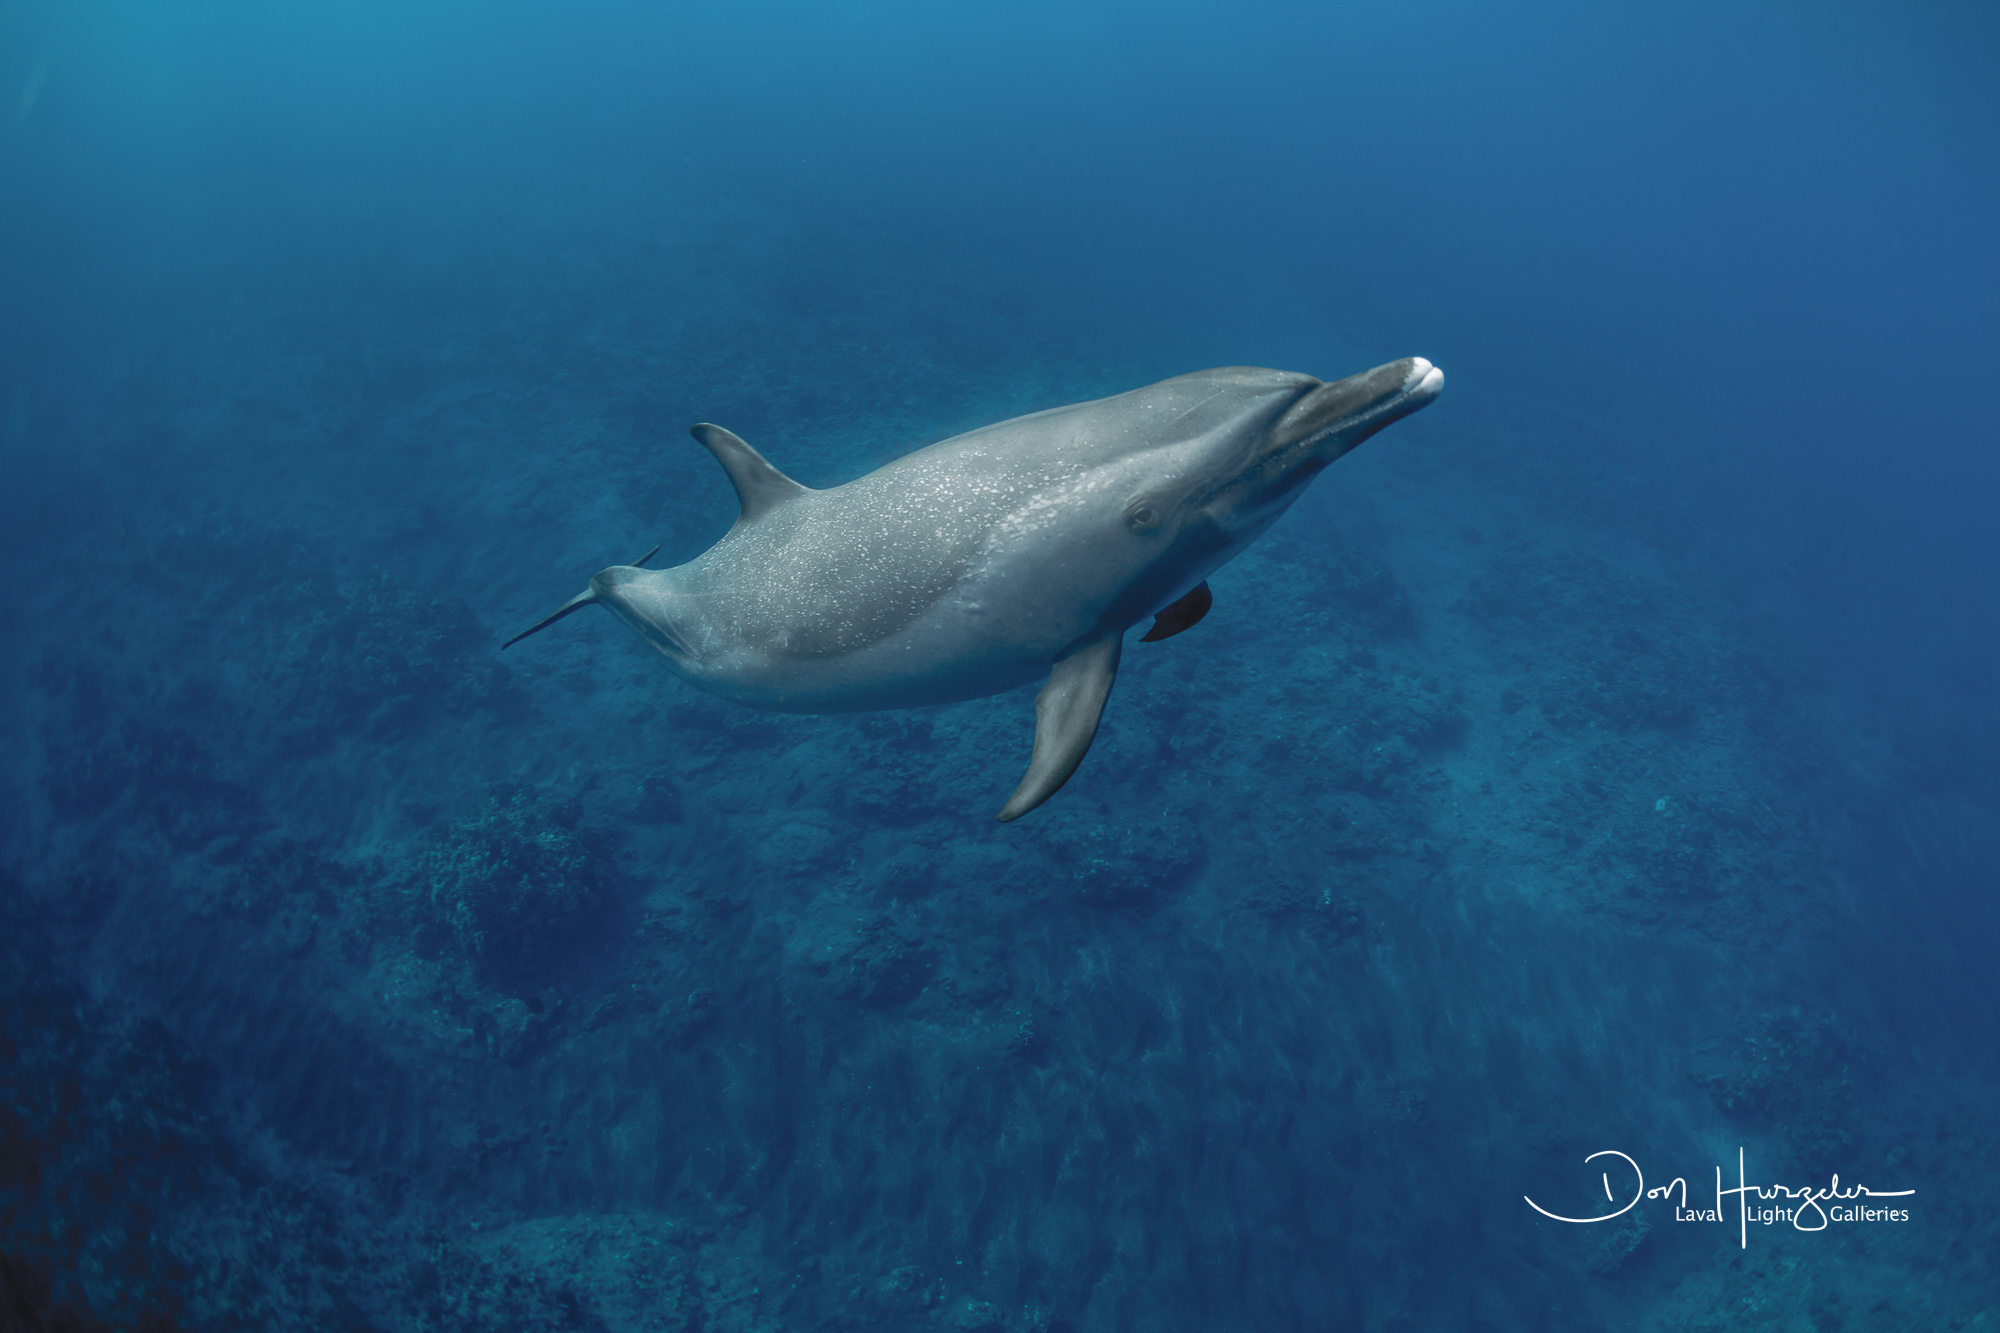 Spotted dolphin on his way up to say hello.